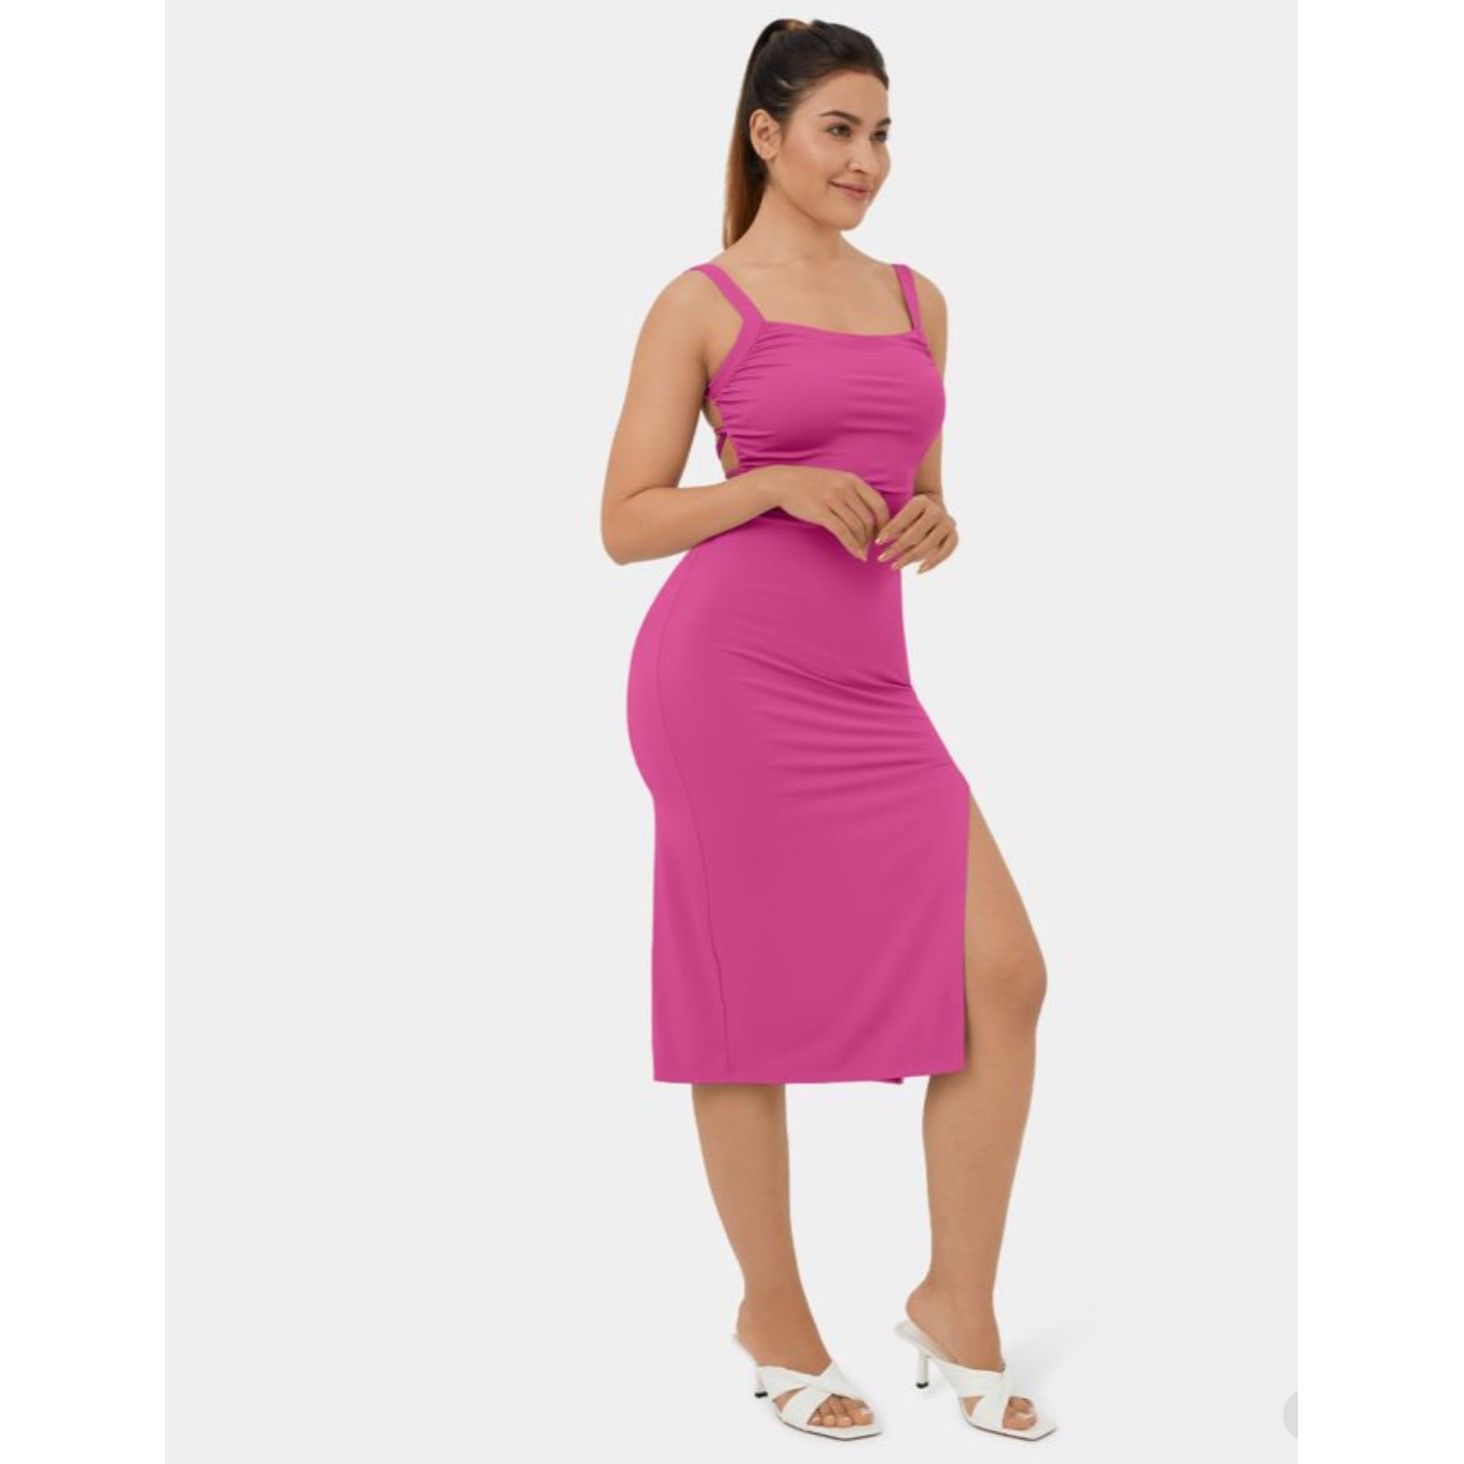 Women's Ruched Backless Crisscross Lace Up Split Bodycon Midi